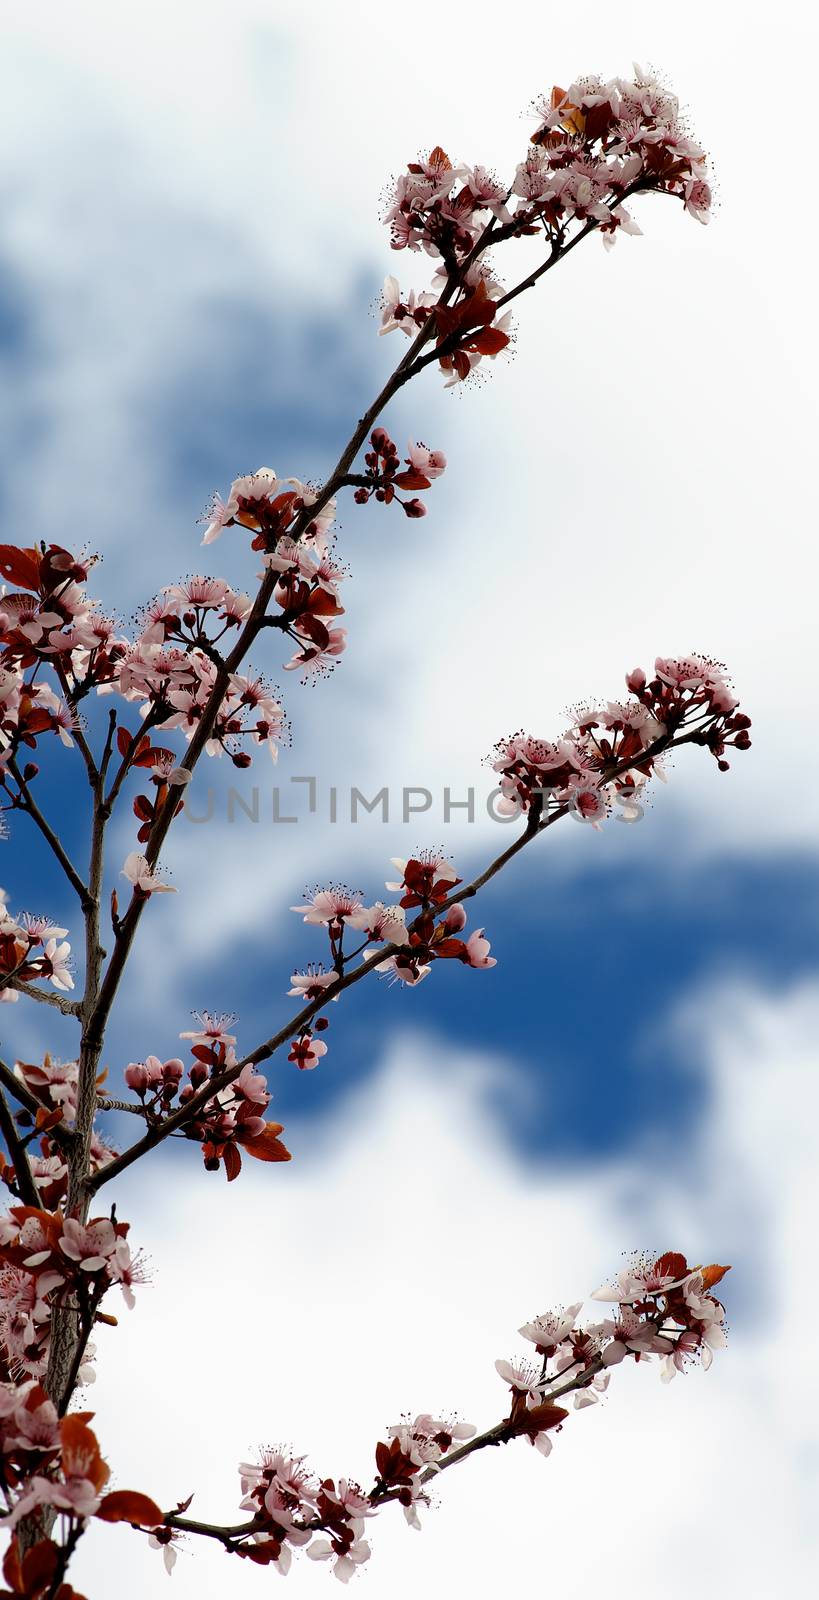 Beauty Pink Cheery Tree Blossom against Blue Skies with White Clouds Outdoors